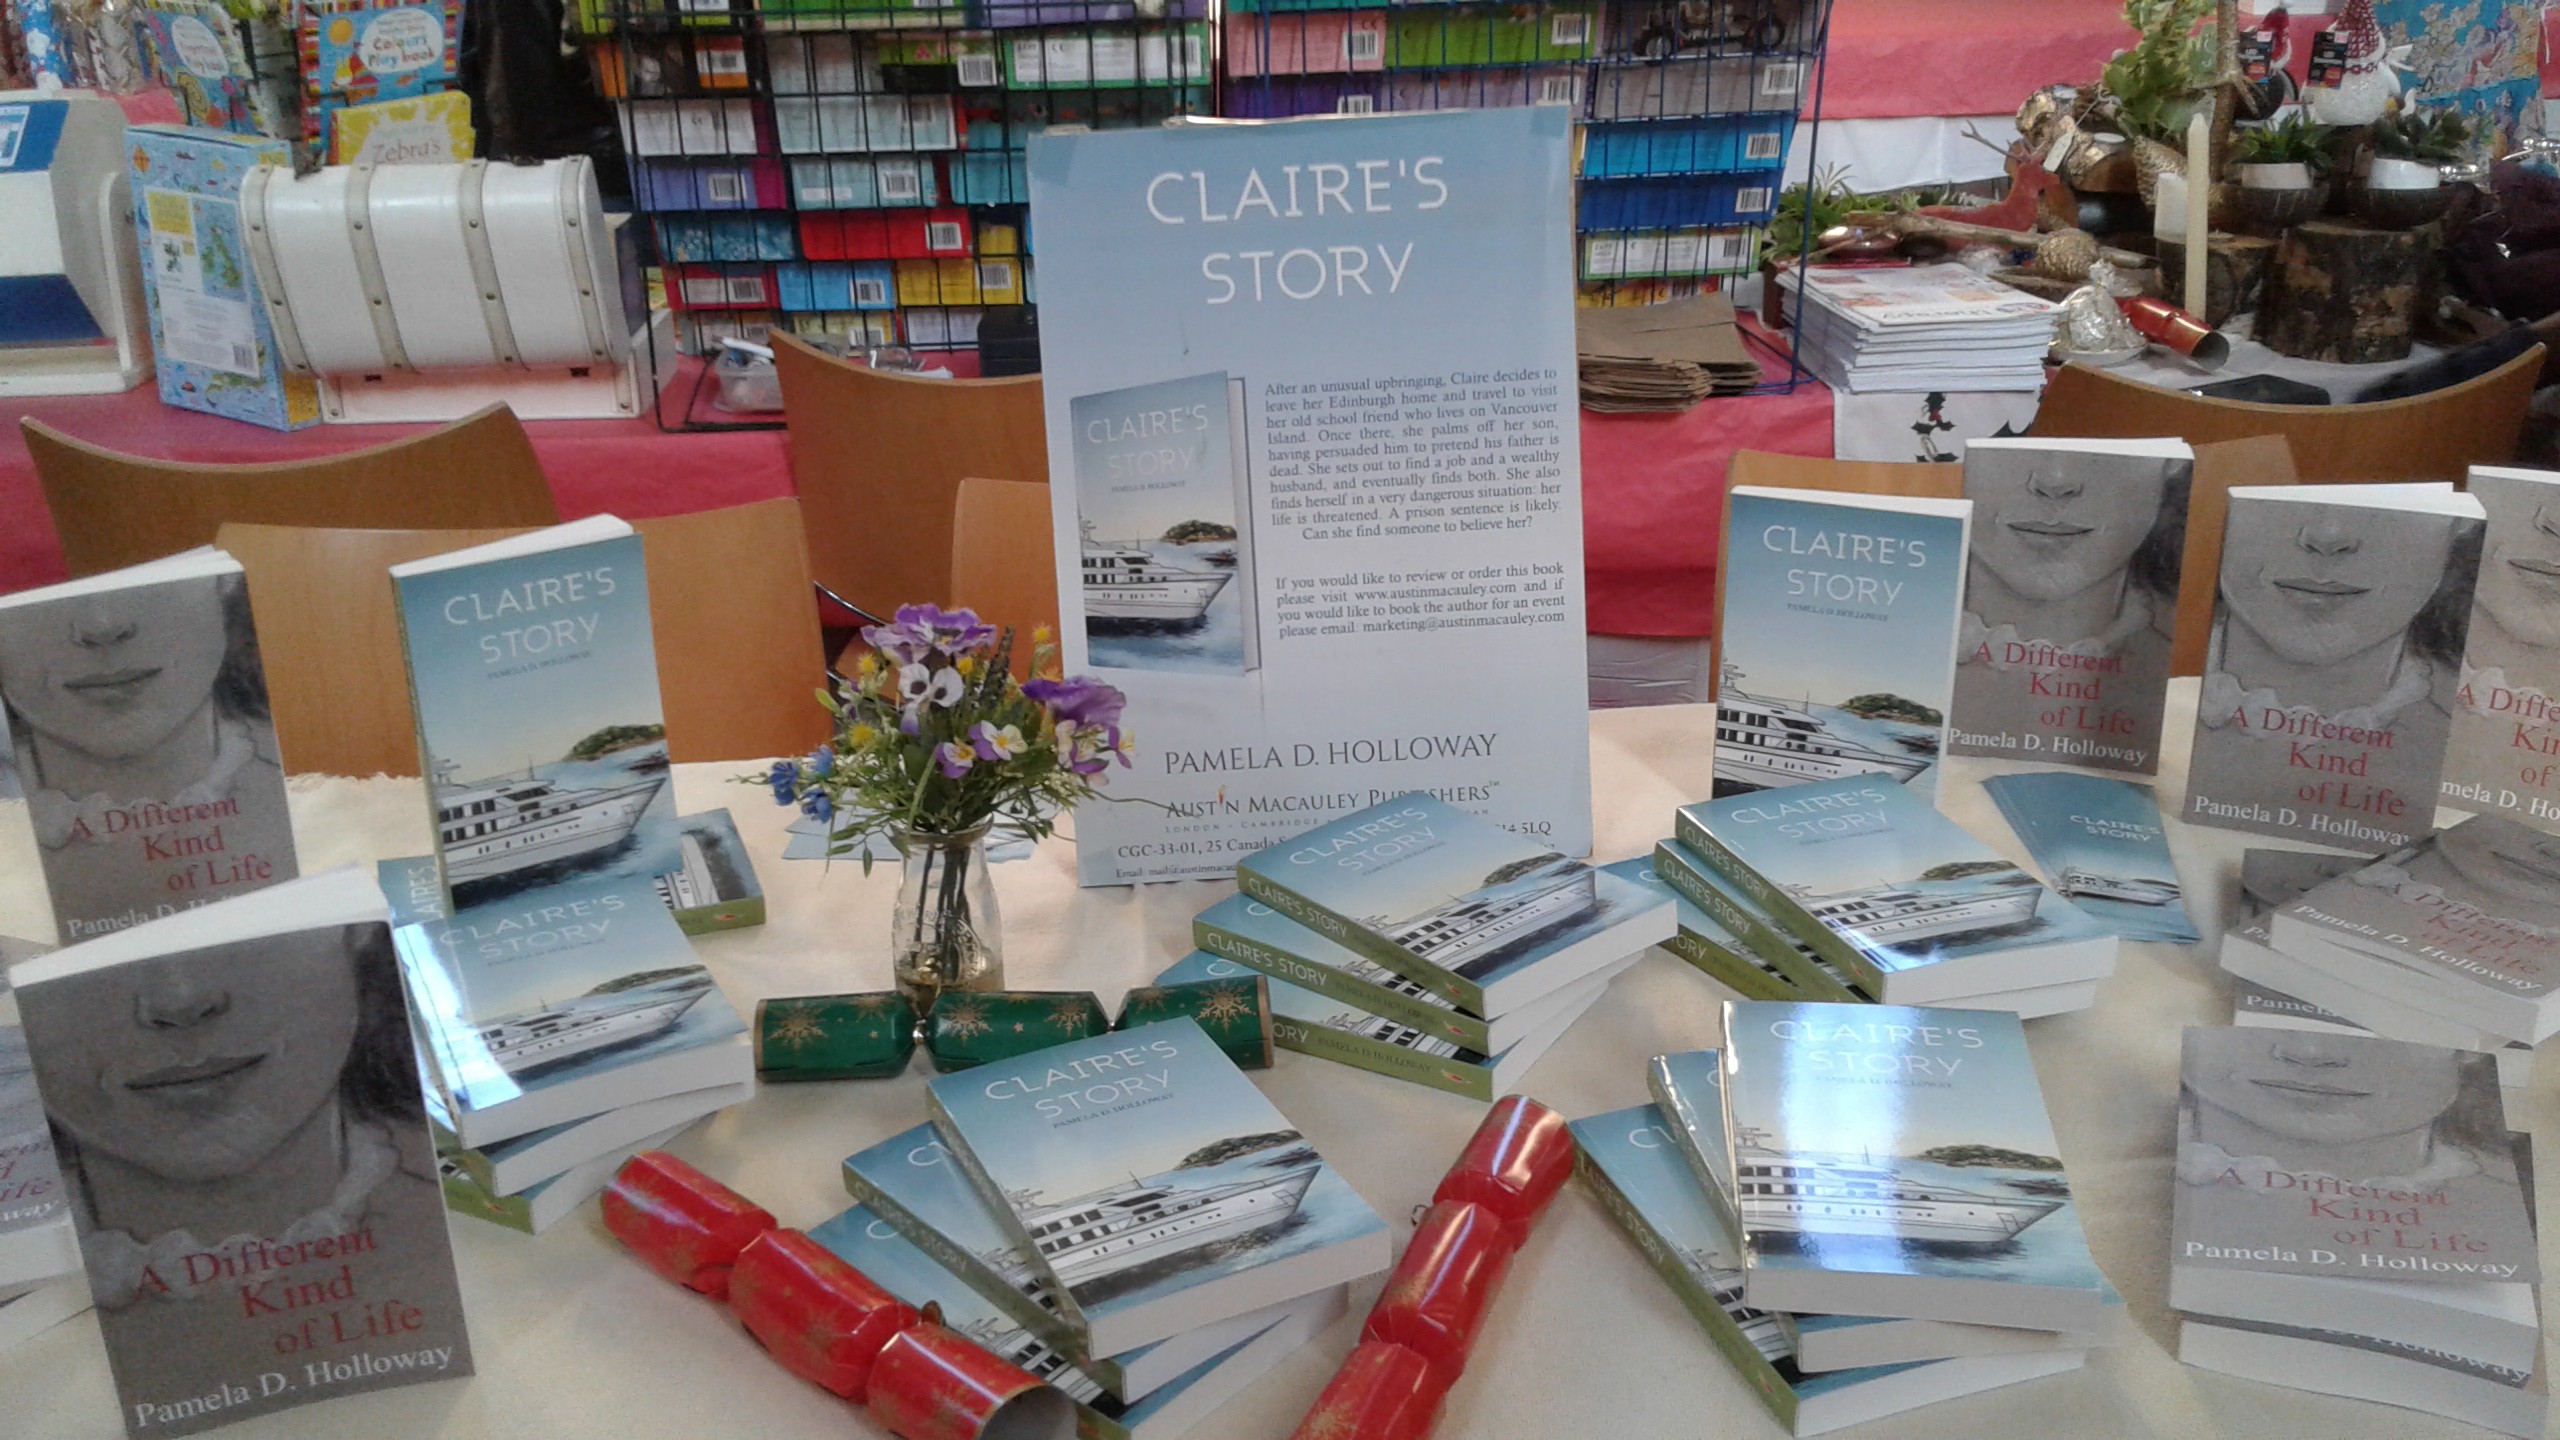 Pamela Holloway, the author of Claire’s Story, was at St Michael’s Hospice for Book Signing